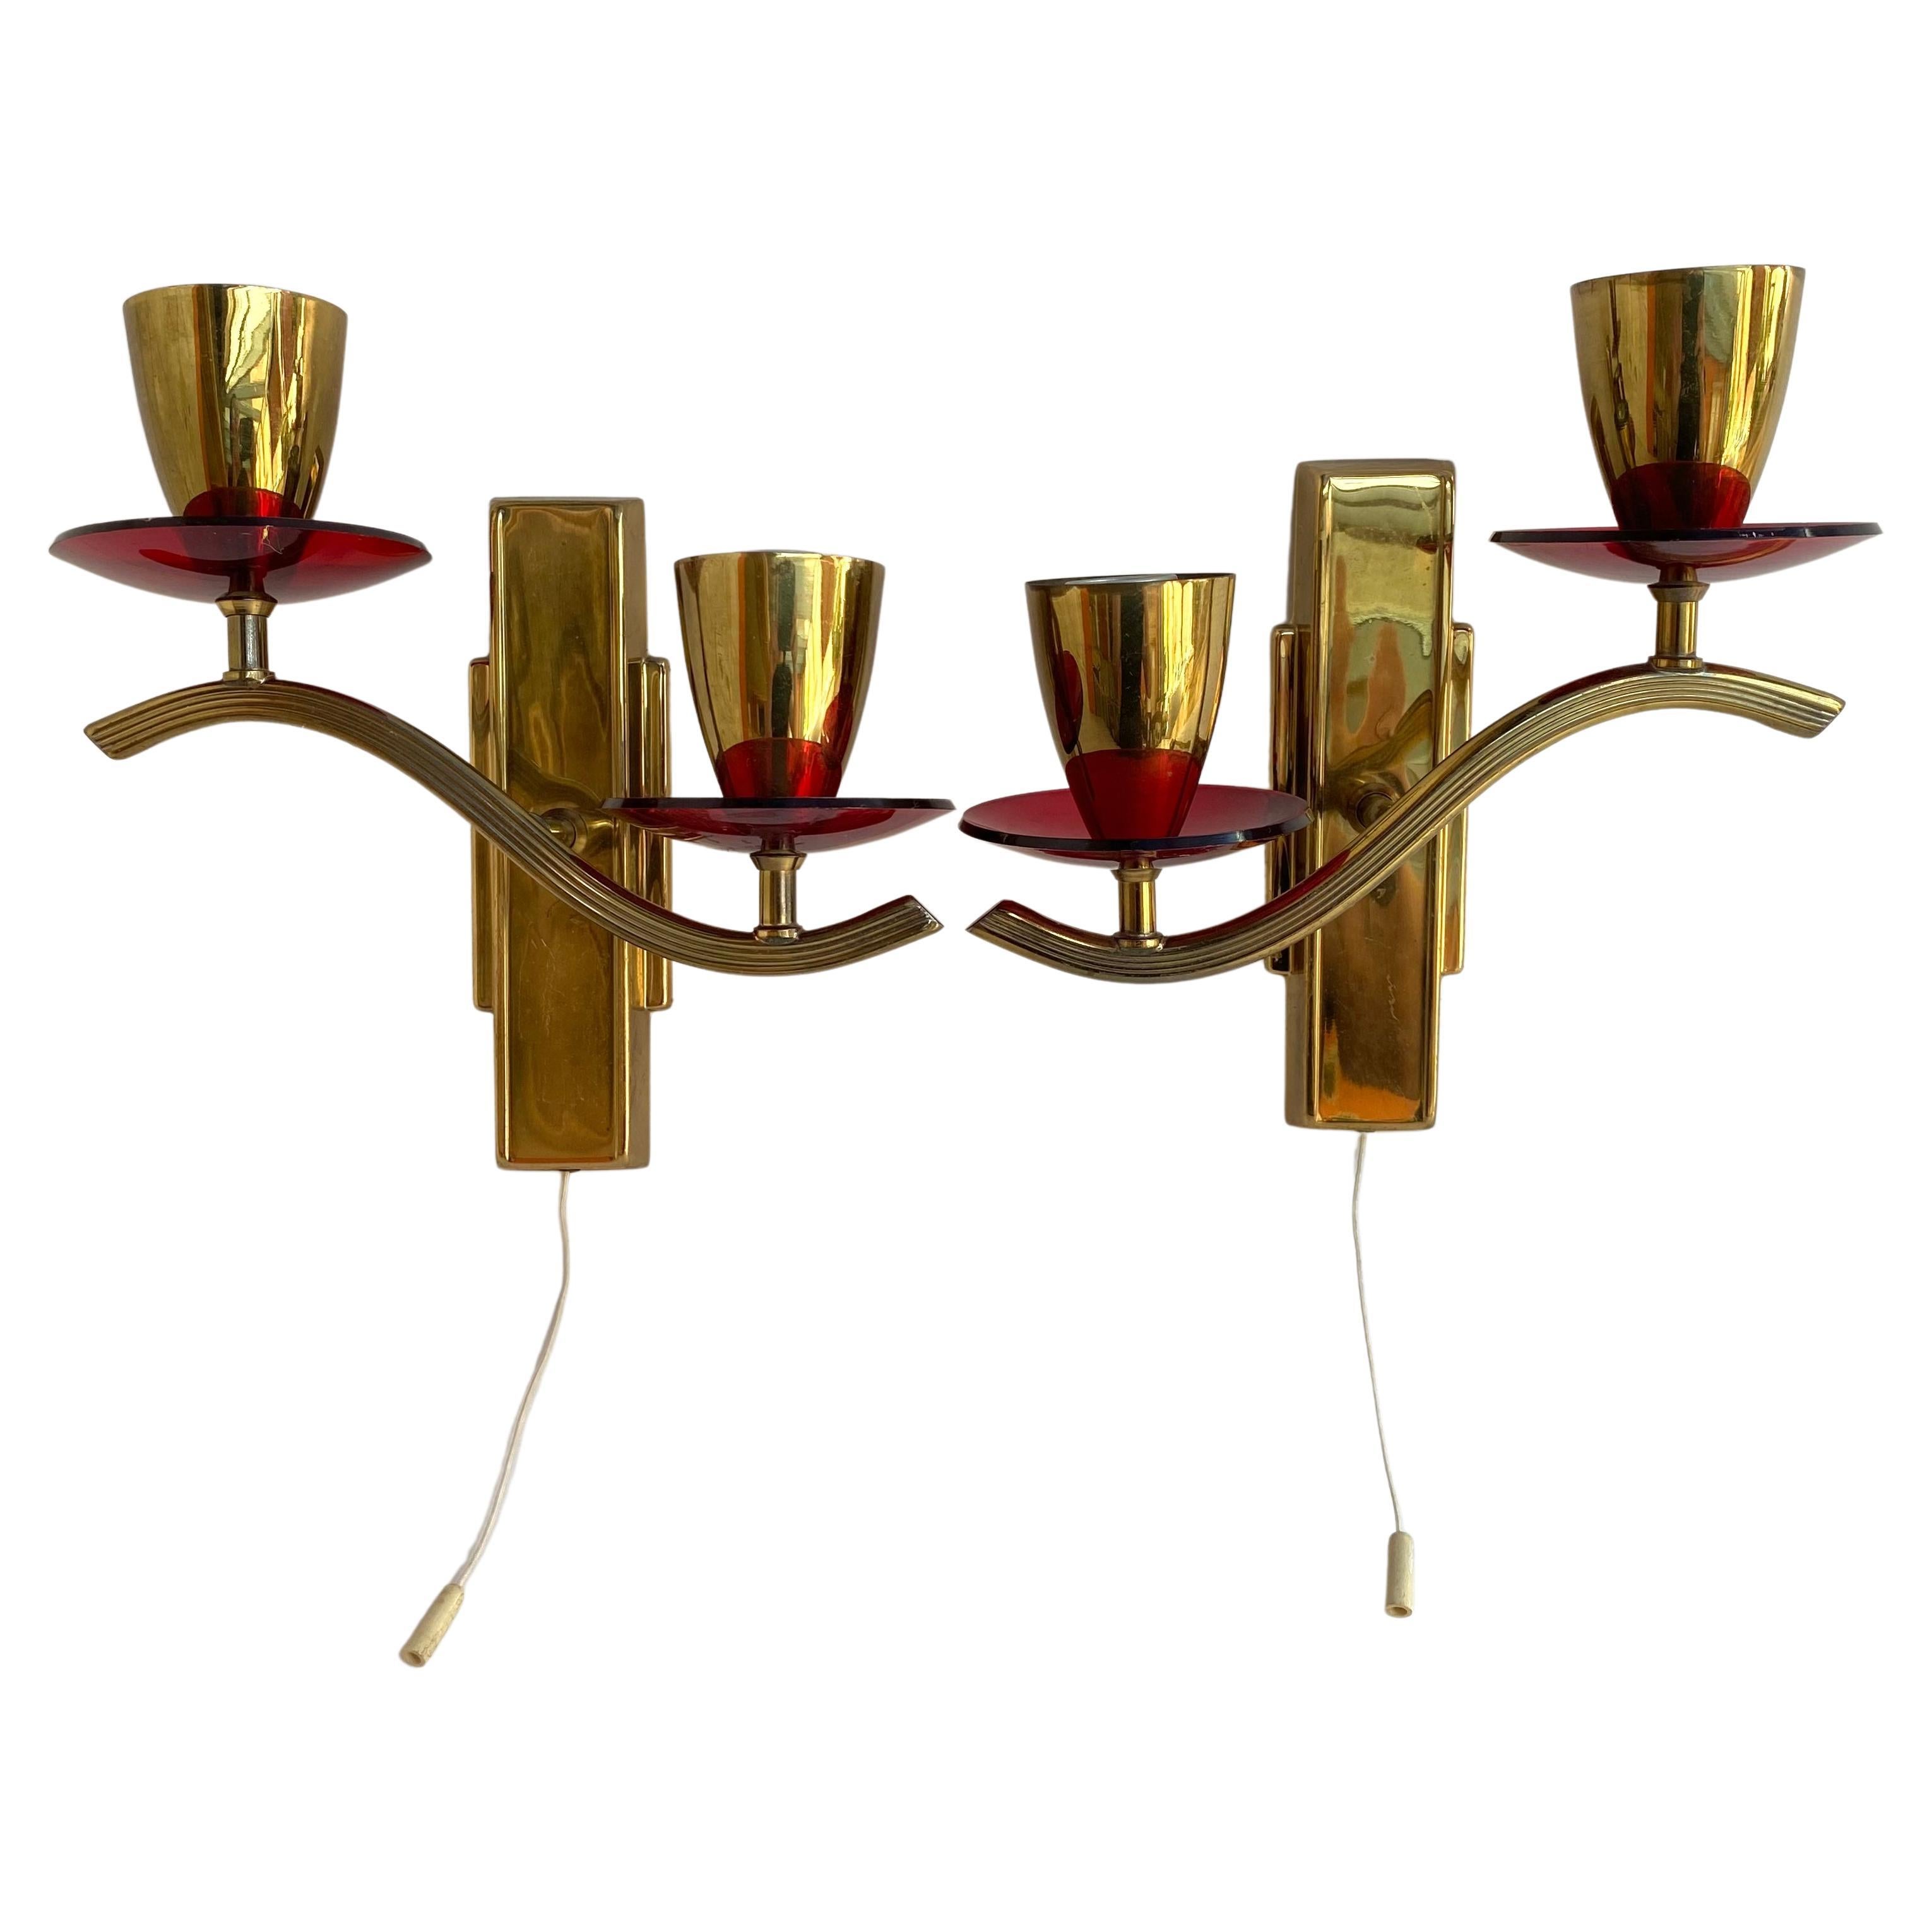 Vintage Wall Sconces in Gilt Brass with Plexiglass Elements, Set 2, Germany For Sale